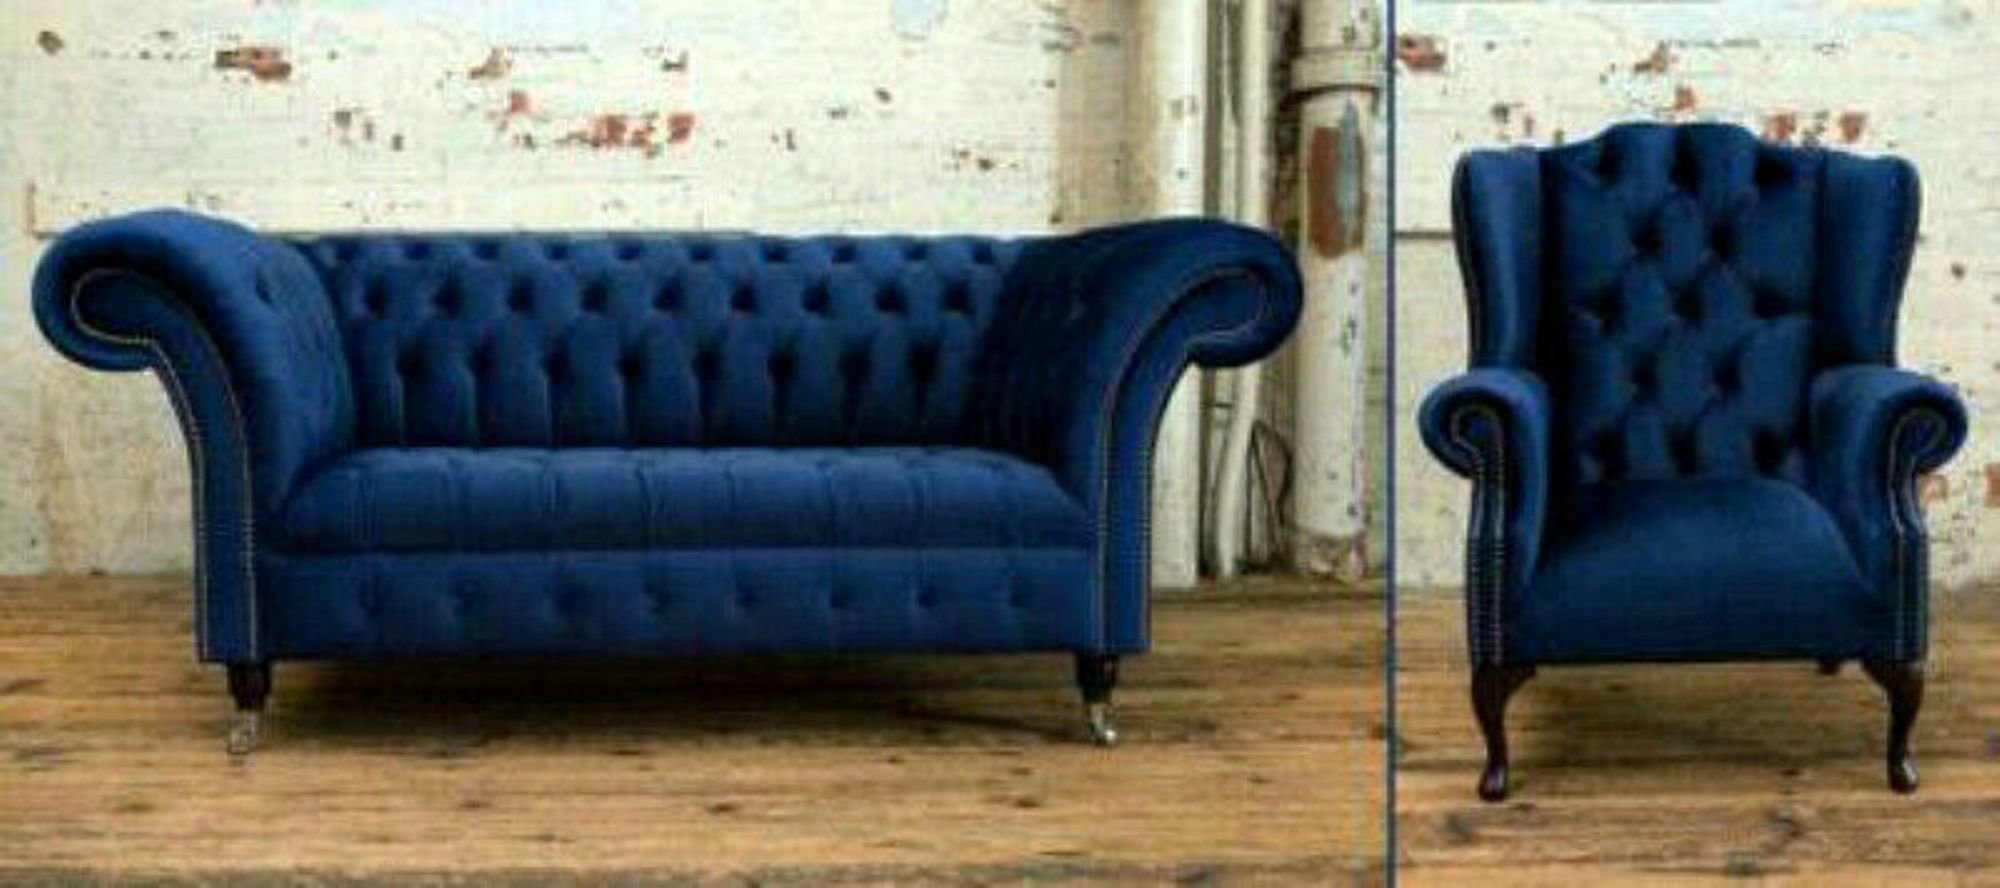 JVmoebel Chesterfield-Sofa Designer Sofa Chesterfield 2 Sitzer Couch + Ohrensessel Relax, Made in Europe